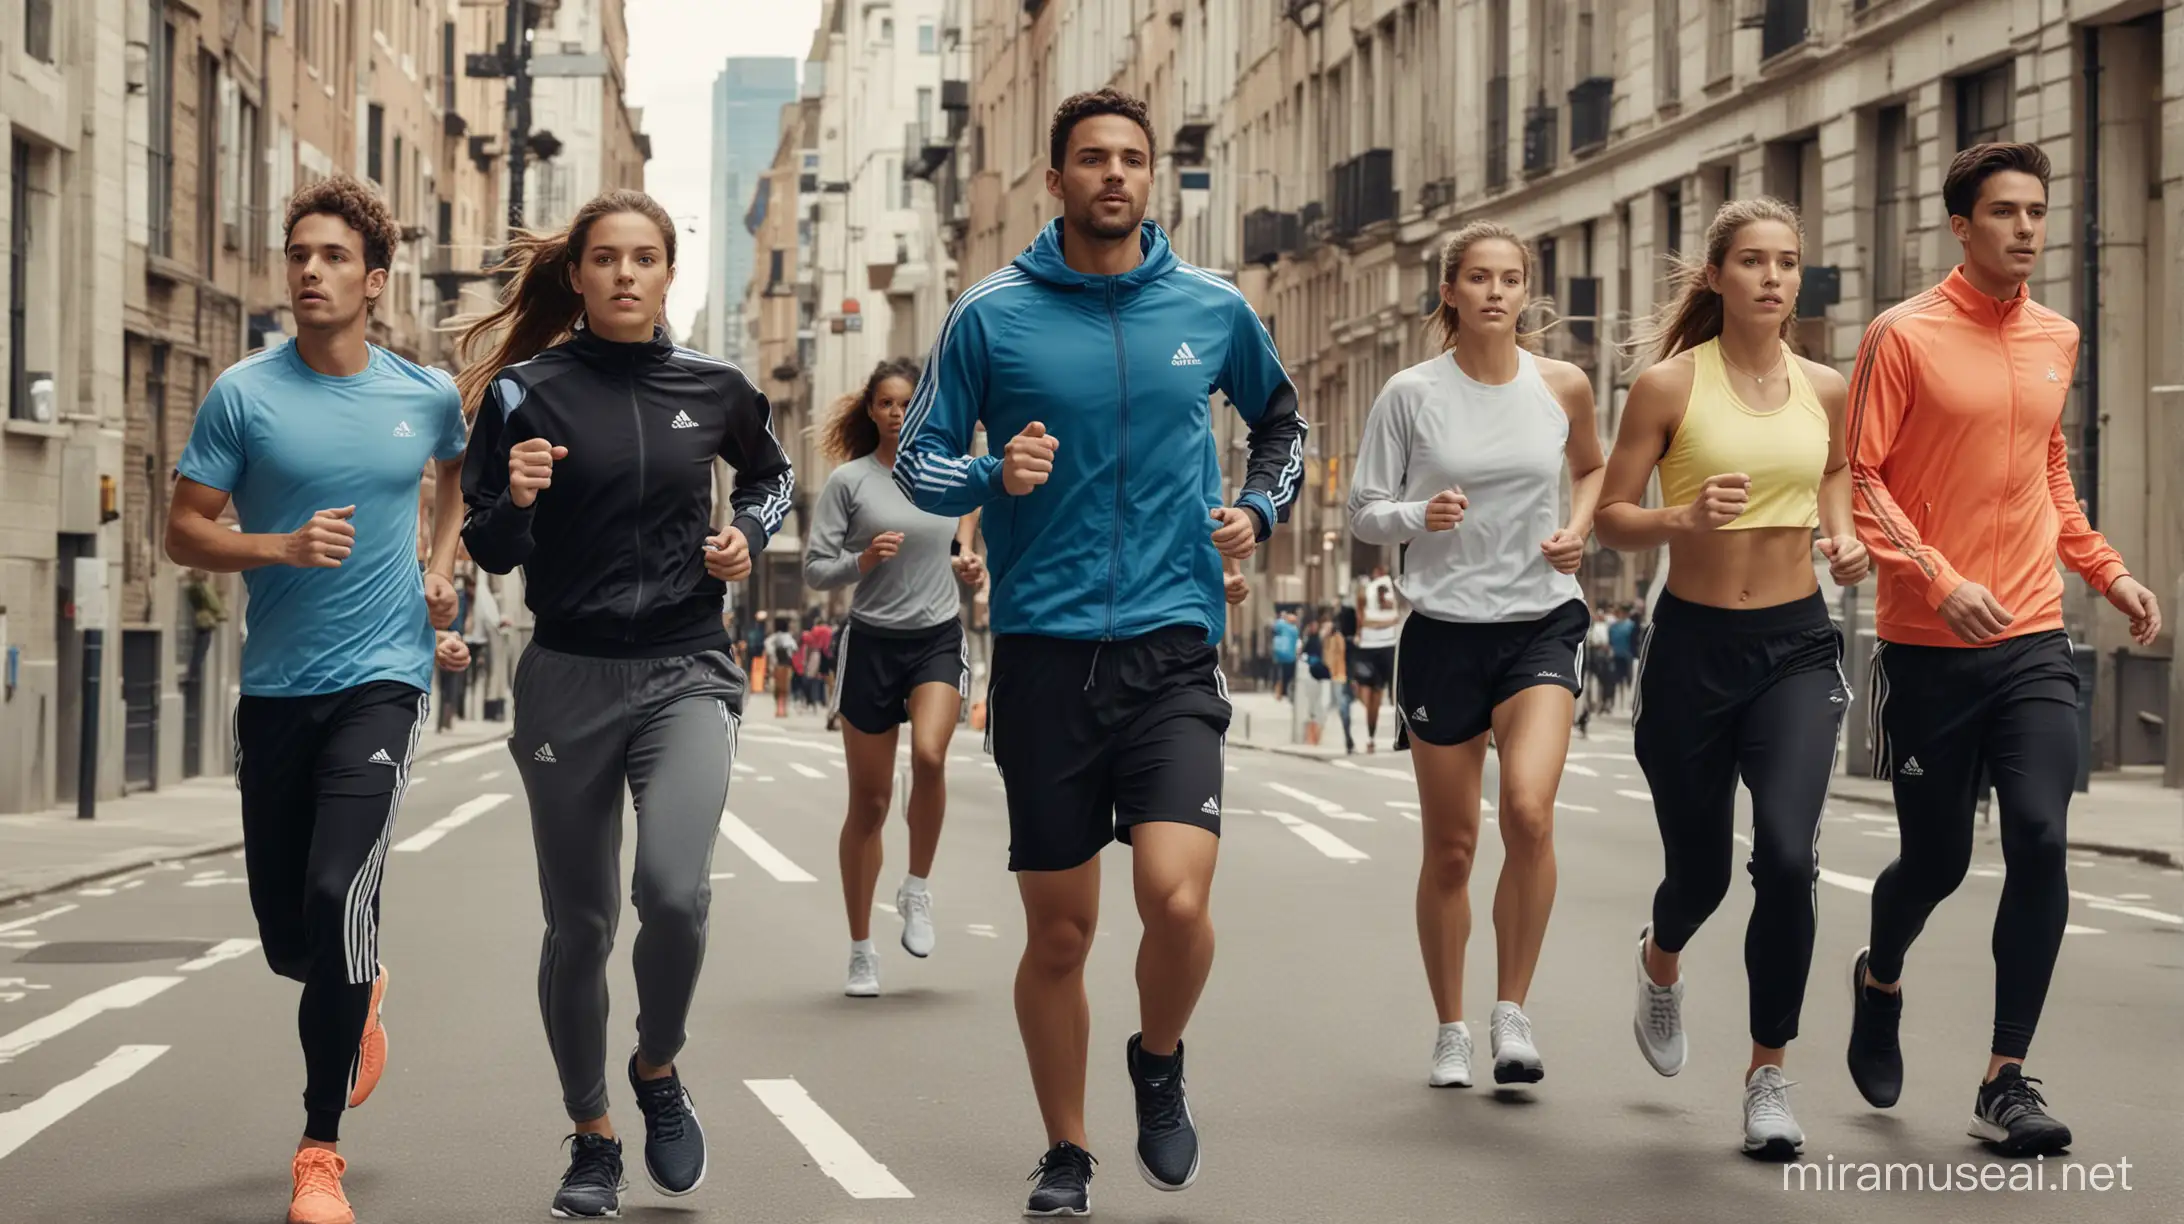 A group of 5 casual runners, 3 male and 2 female, wearing Adidas gear and running in the city
